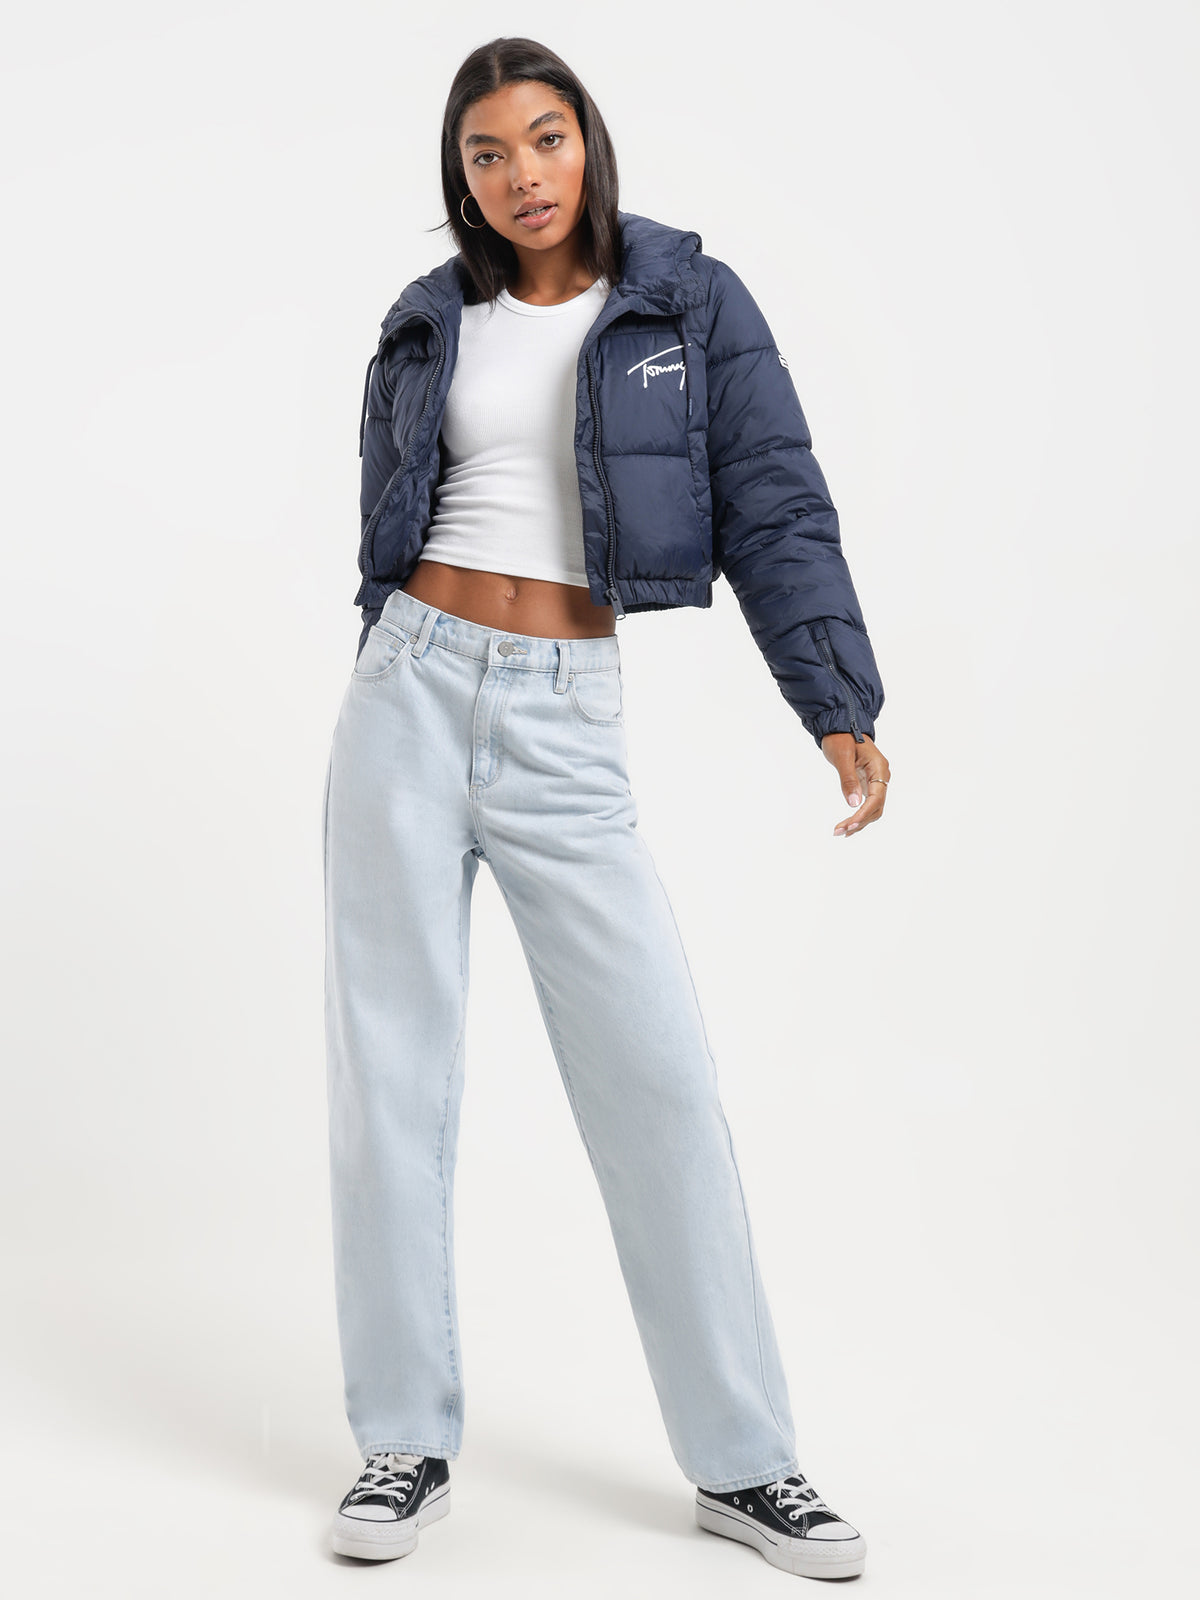 Signature Cropped Puffer in Twilight Navy